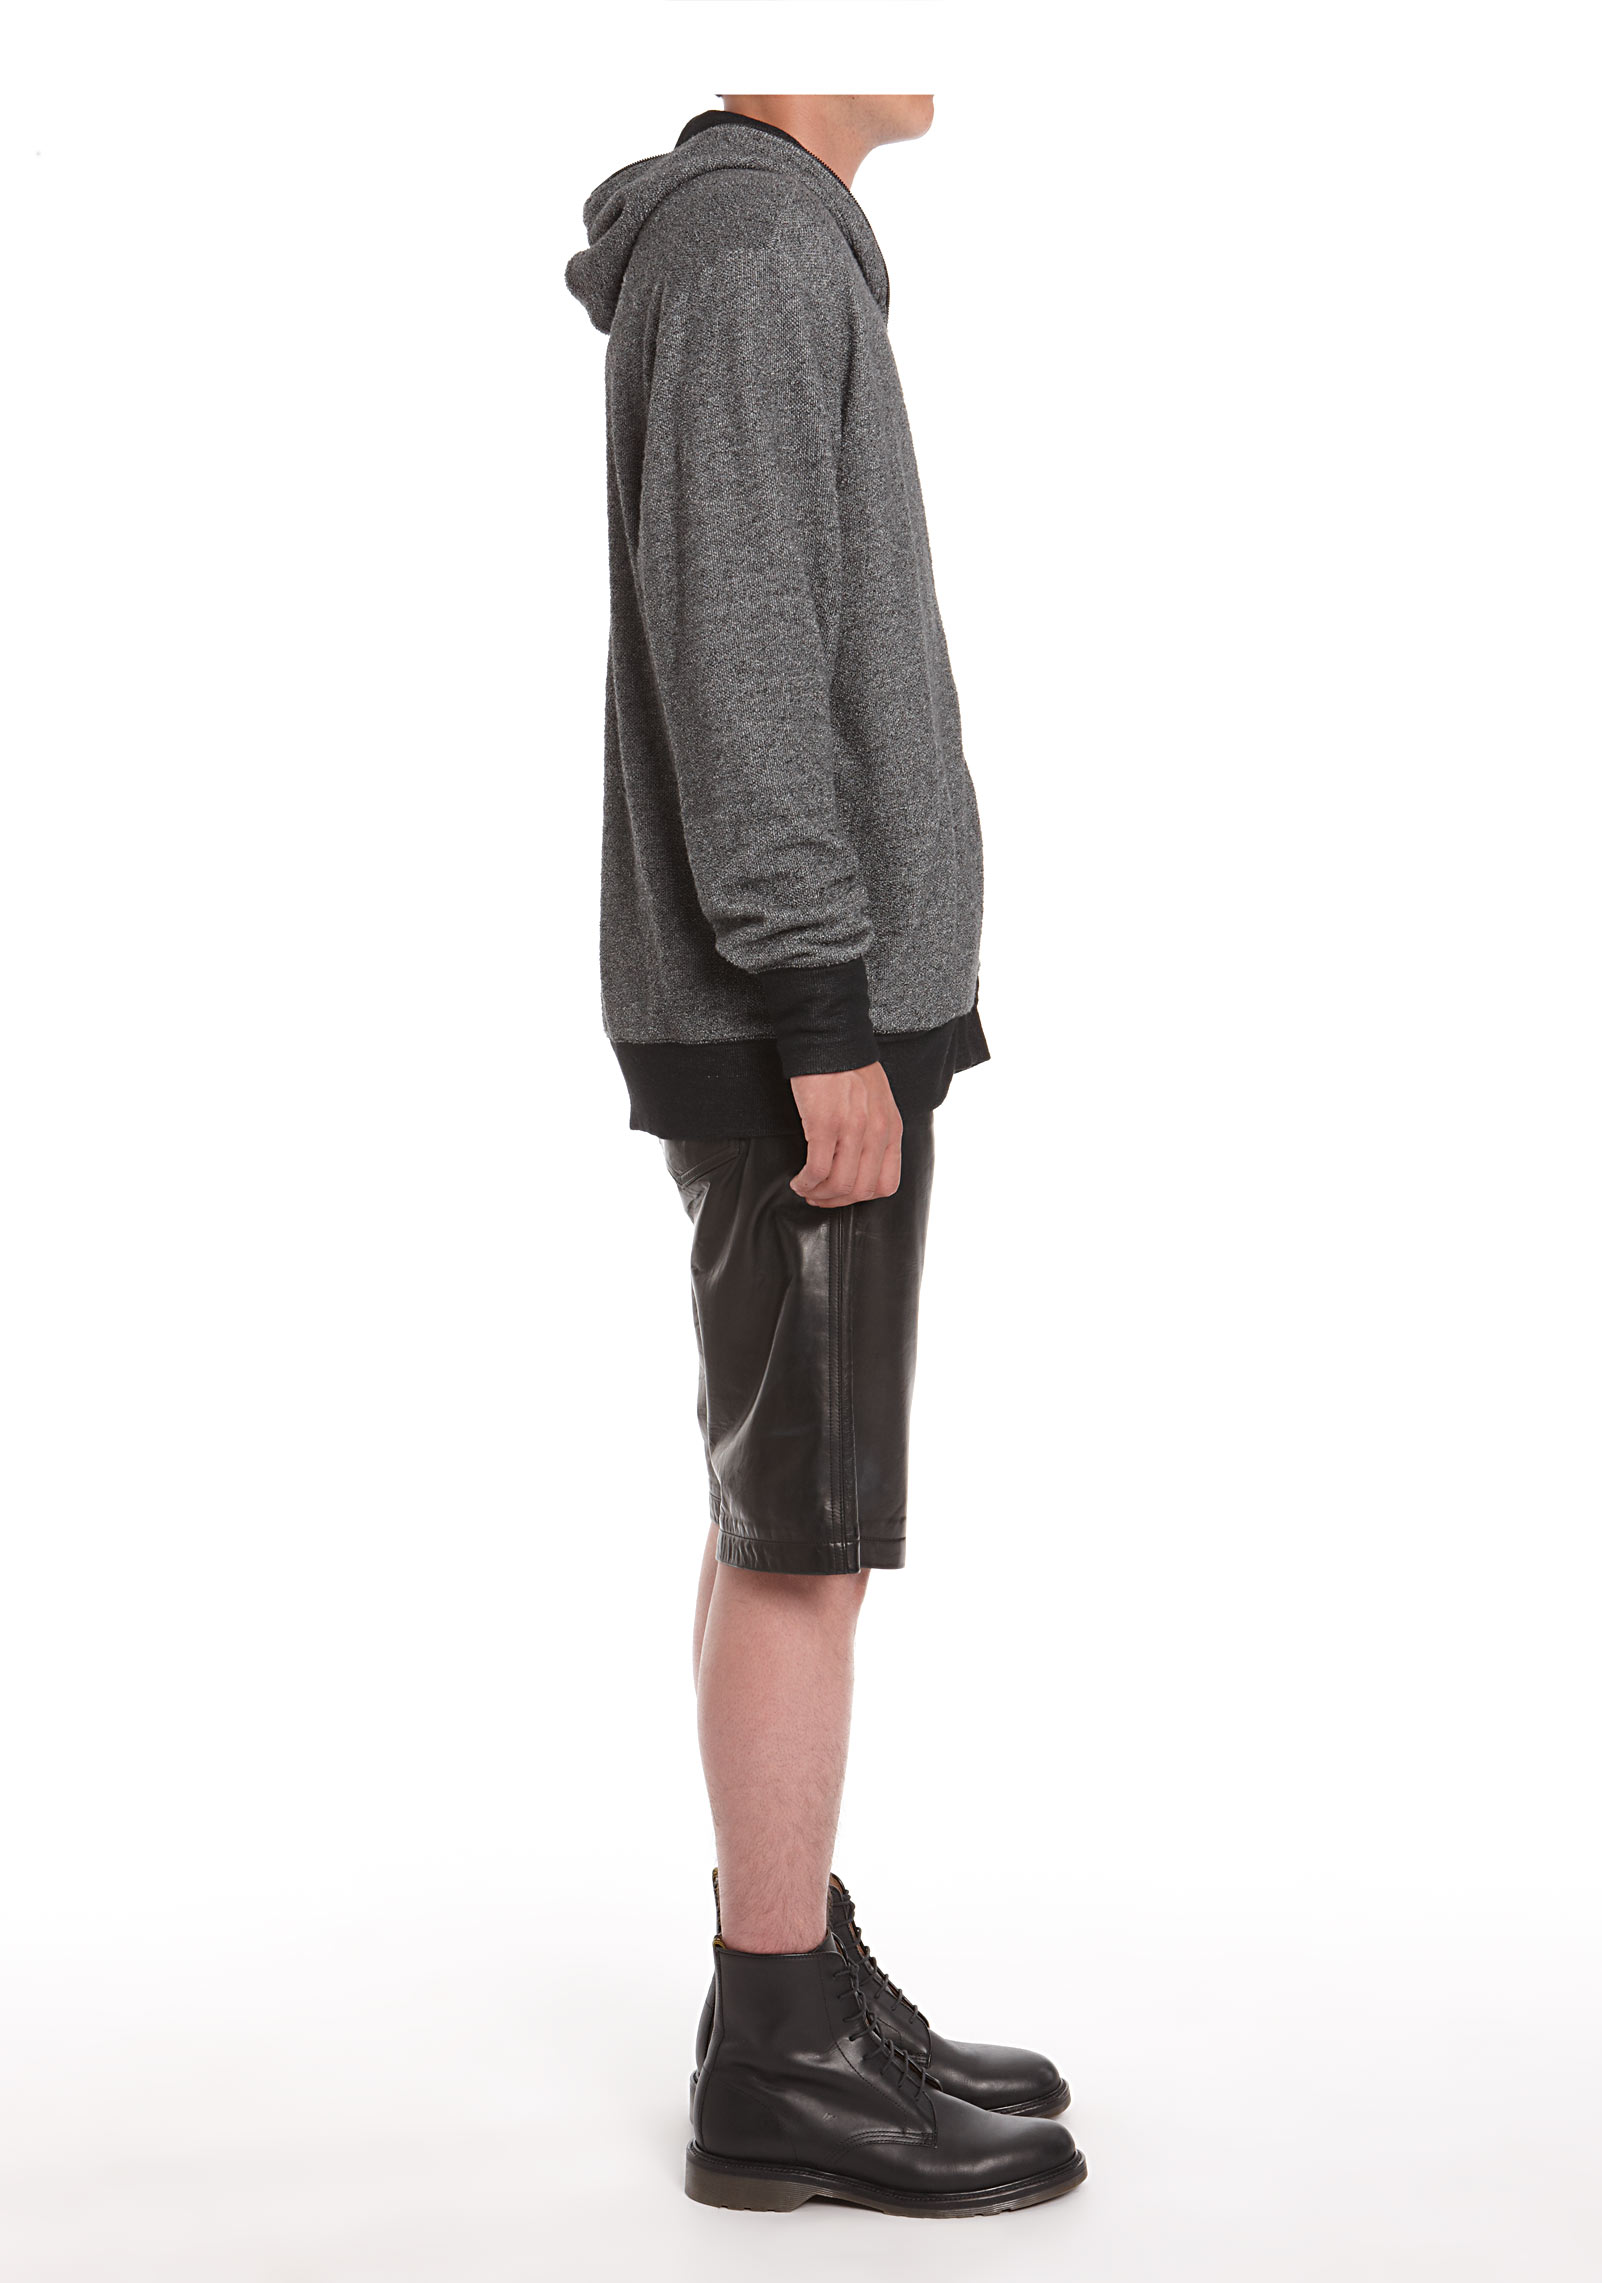 Lyst - Alexander Wang Leather Shorts in Black for Men